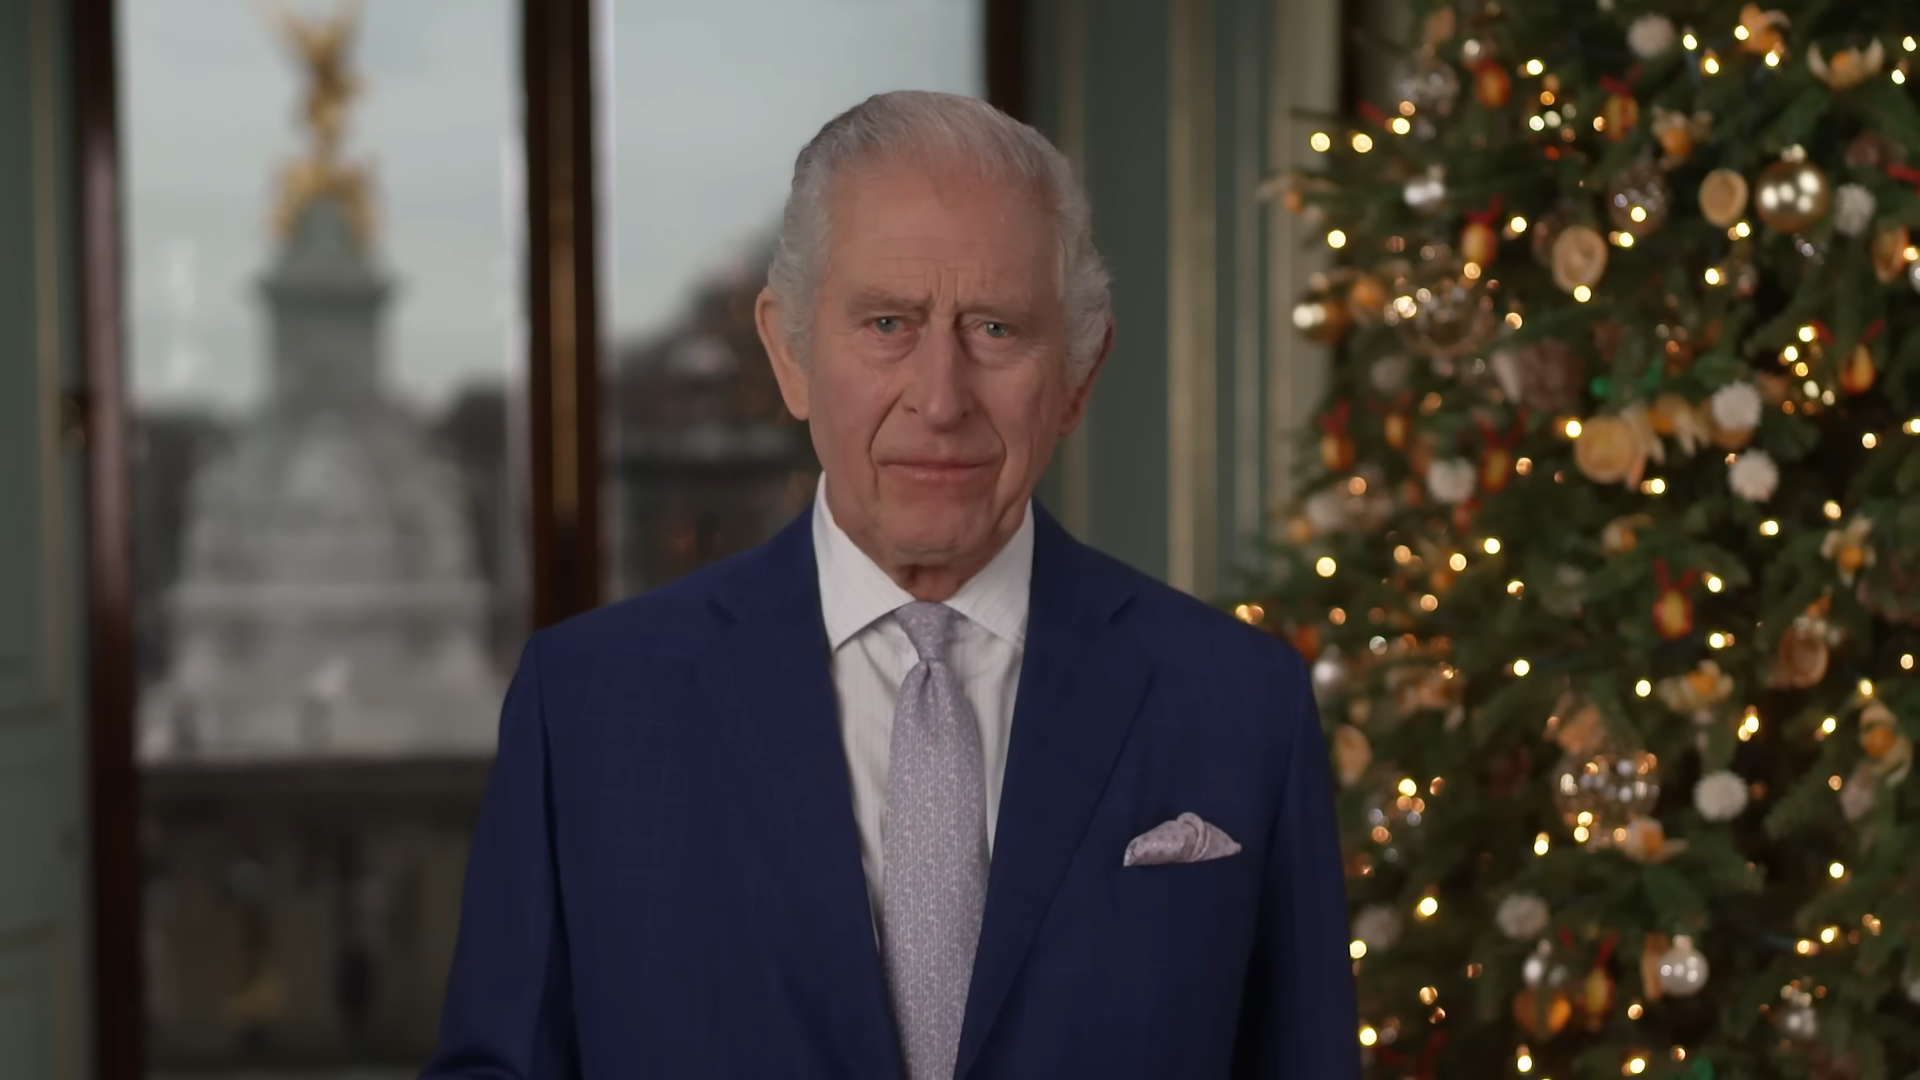 In his Christmas speech, King Charles III mentioned the war in Ukraine and promised to do everything for peace in the world